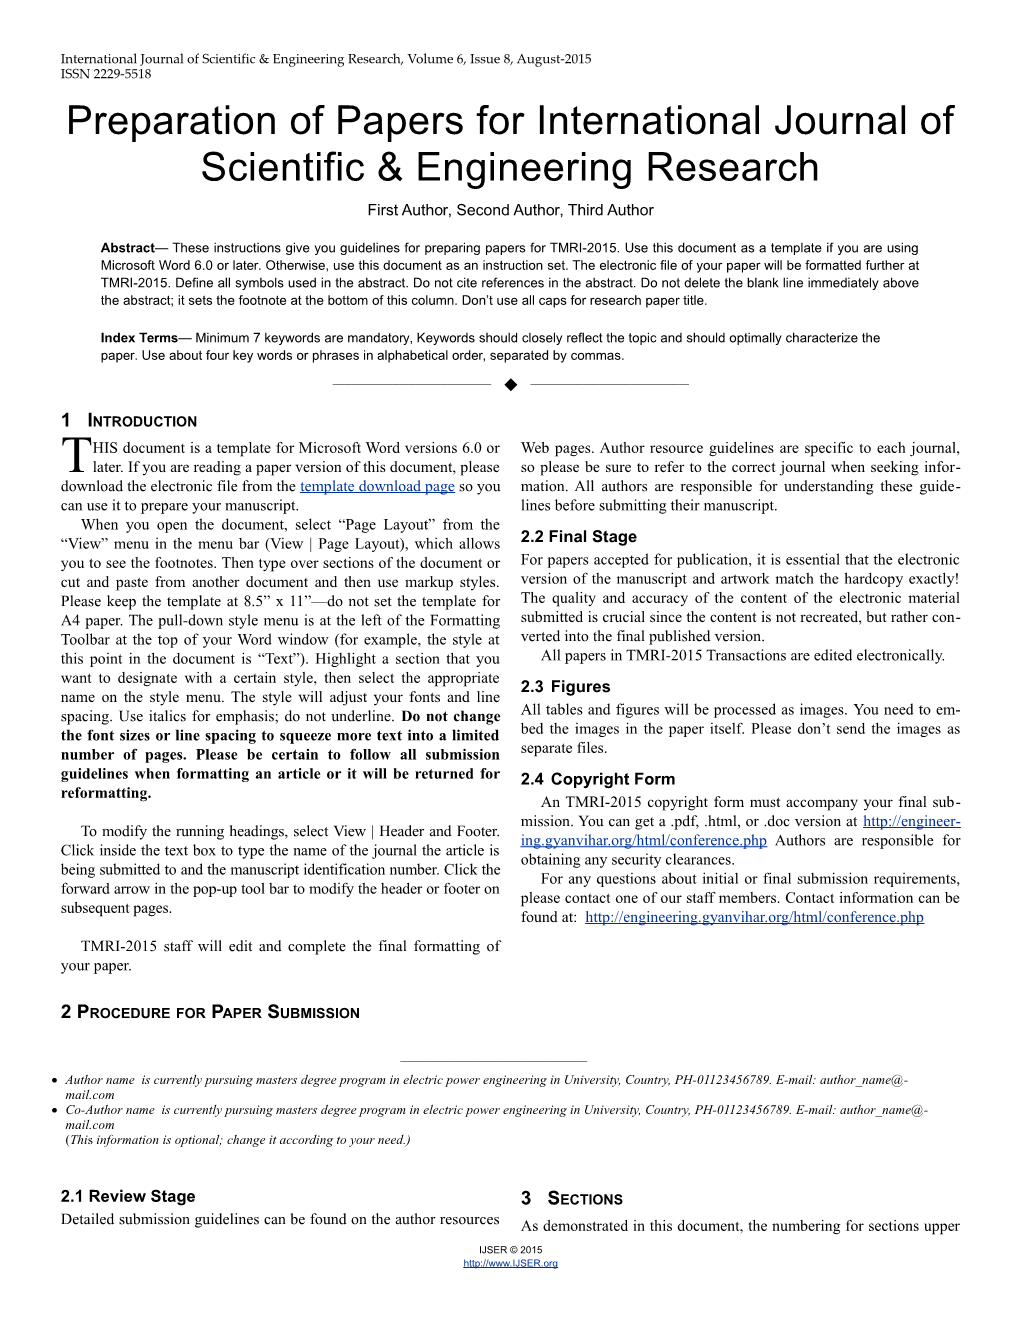 Preparation of Papers for International Journal of Scientific & Engineering Research